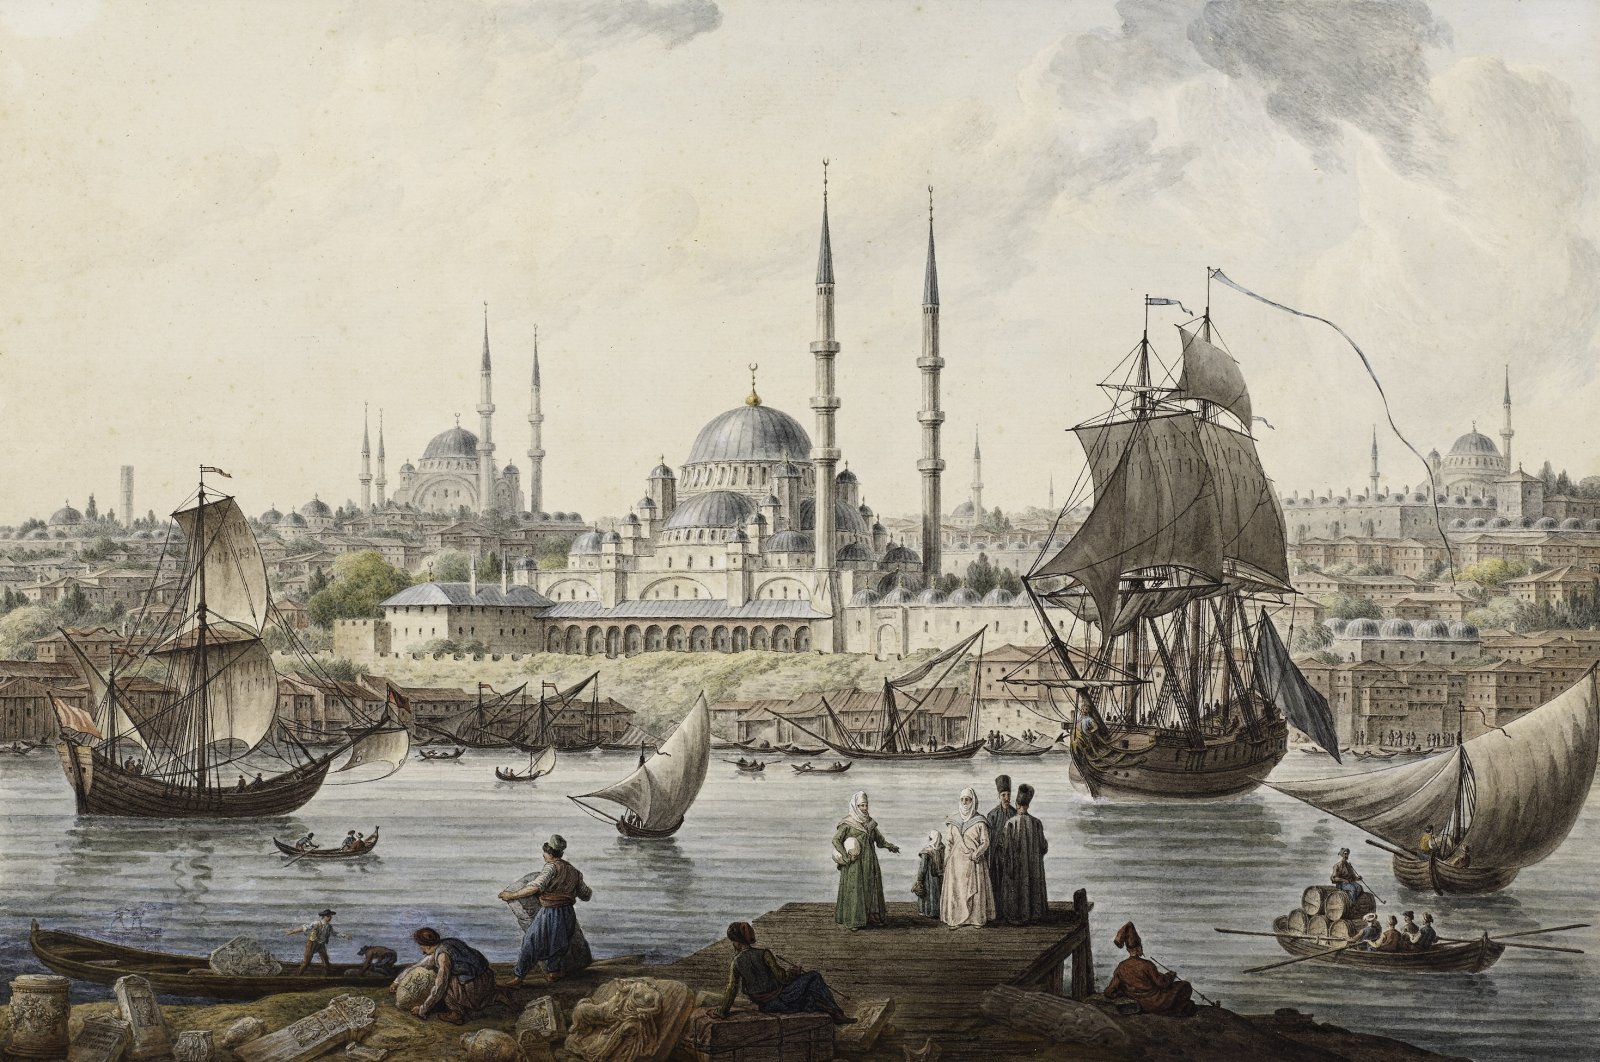 &quot;Yeni Cami and the Port of Istanbul&quot; by Jean-Baptiste Hilaire, watercolor on paper. (Courtesy of Pera Museum)